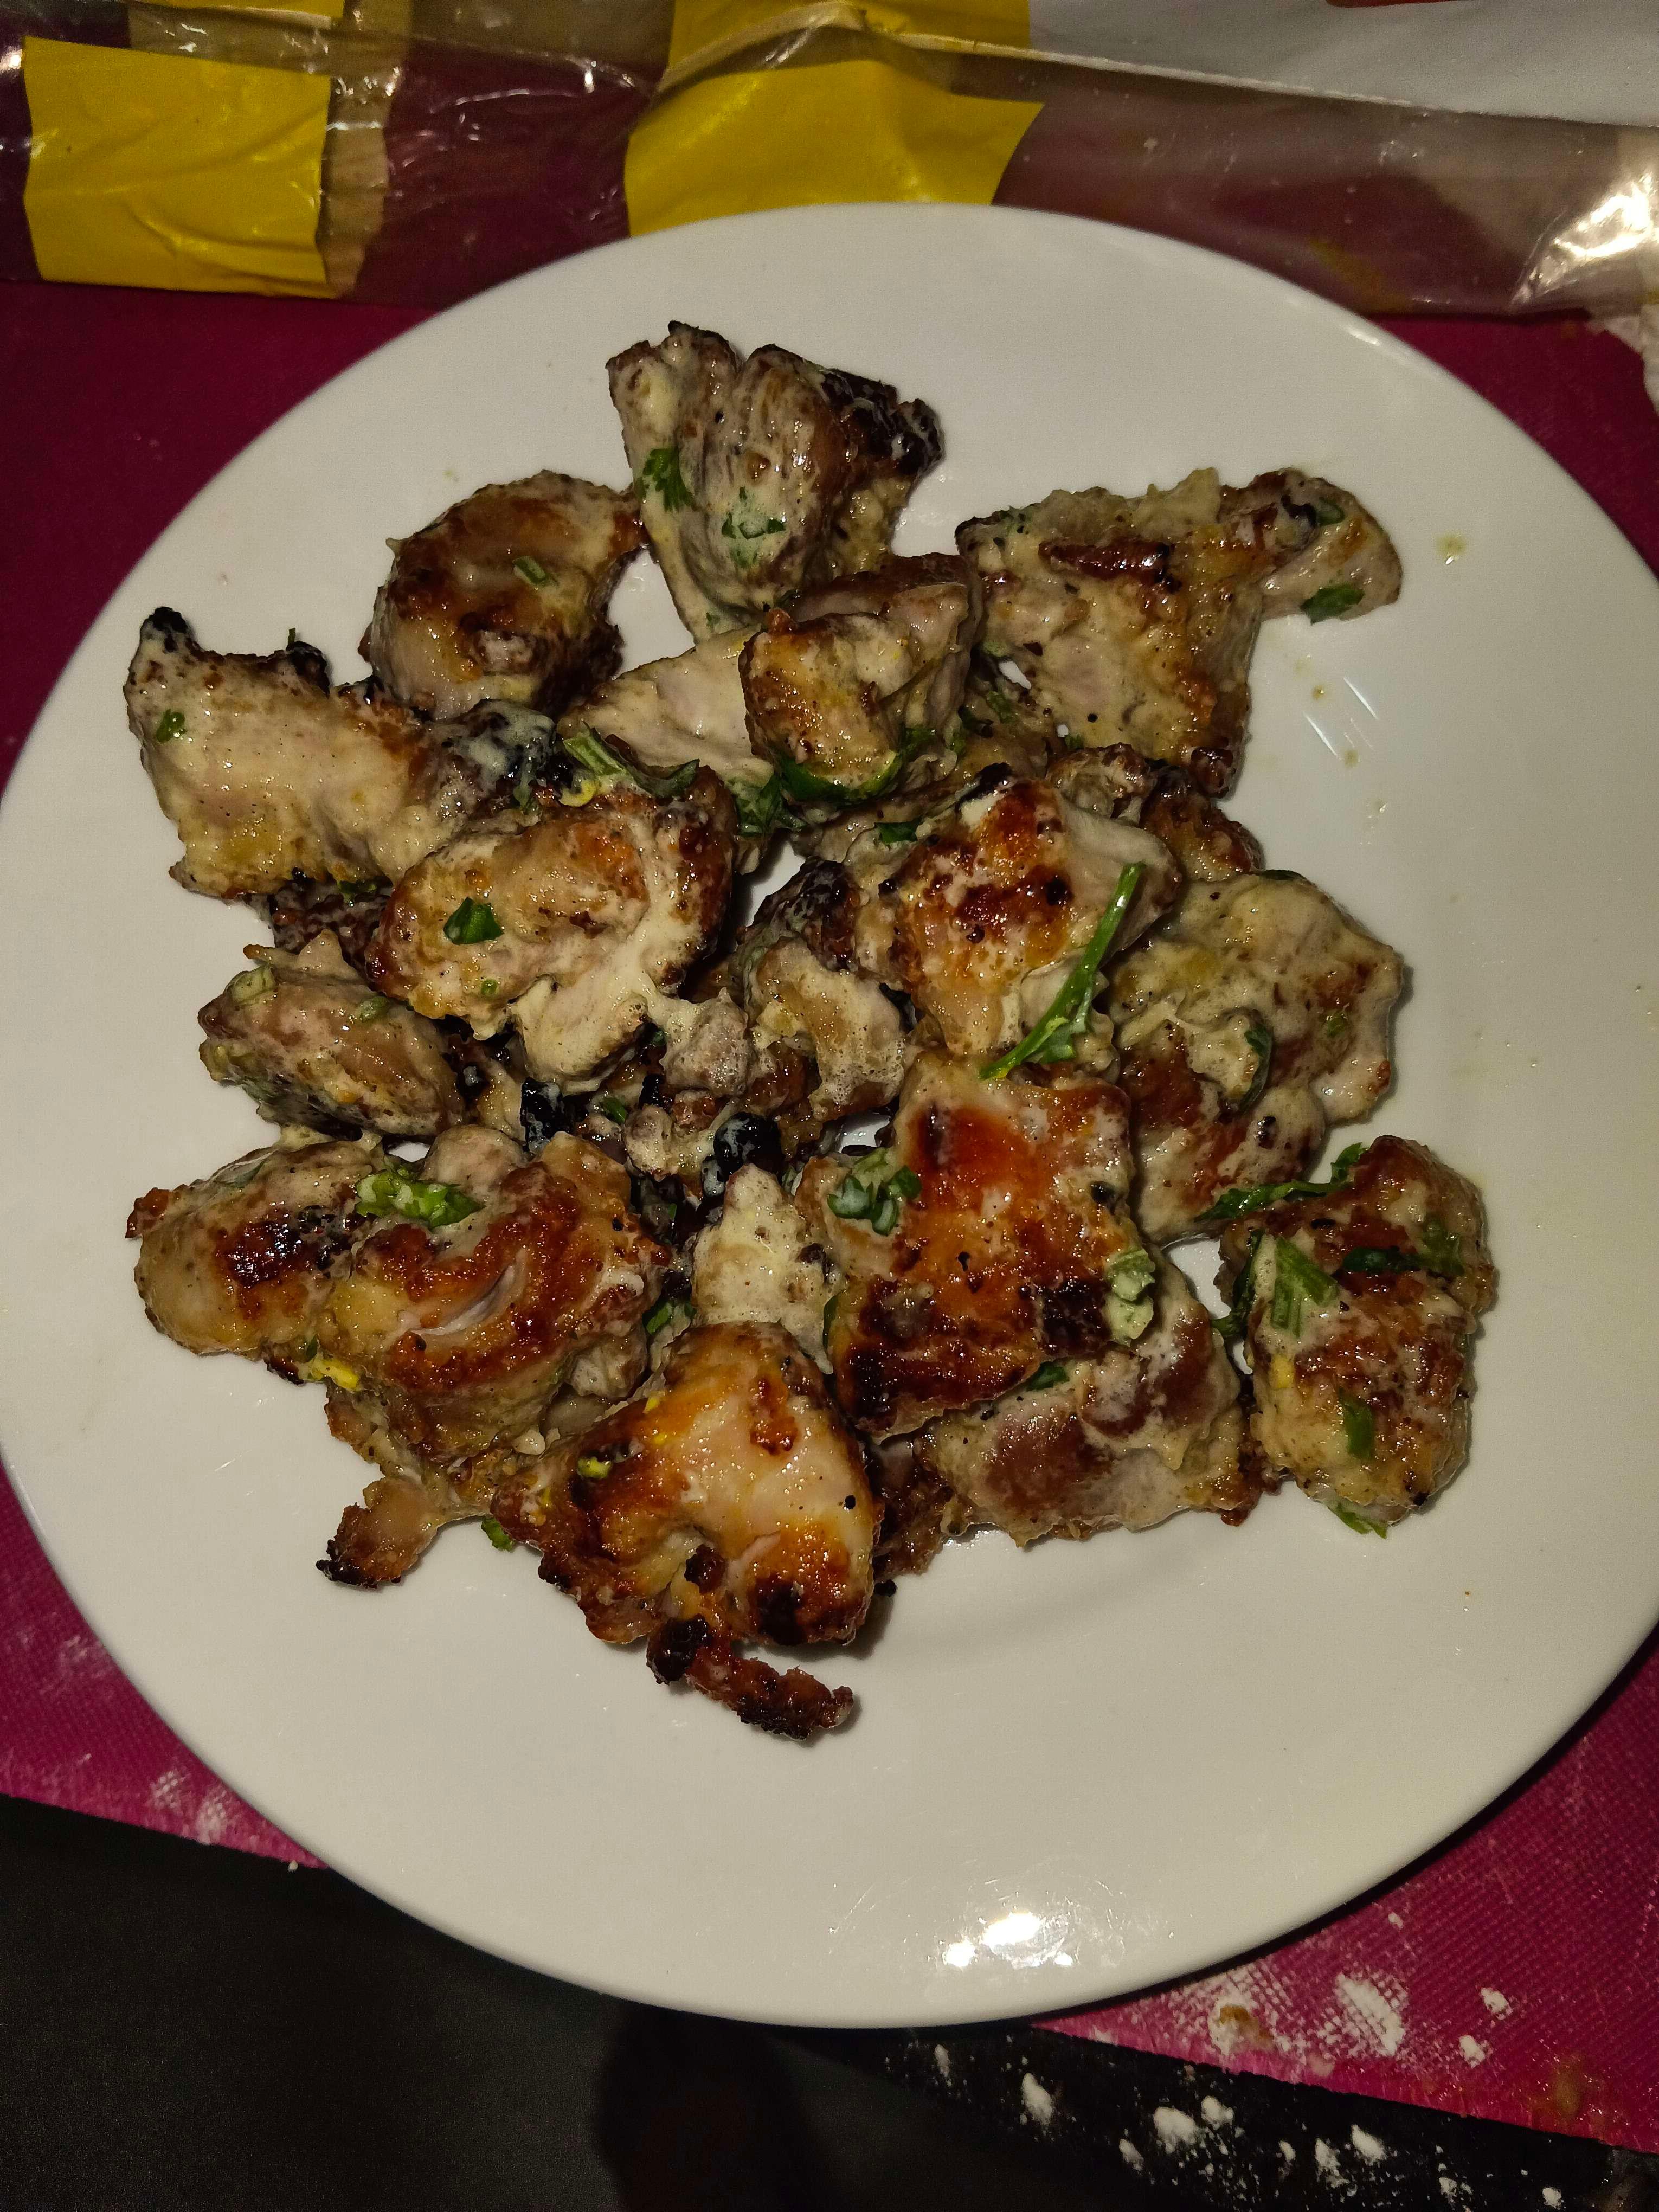 Tasty Murgh Malai Tikka cooked by COOX chefs cooks during occasions parties events at home